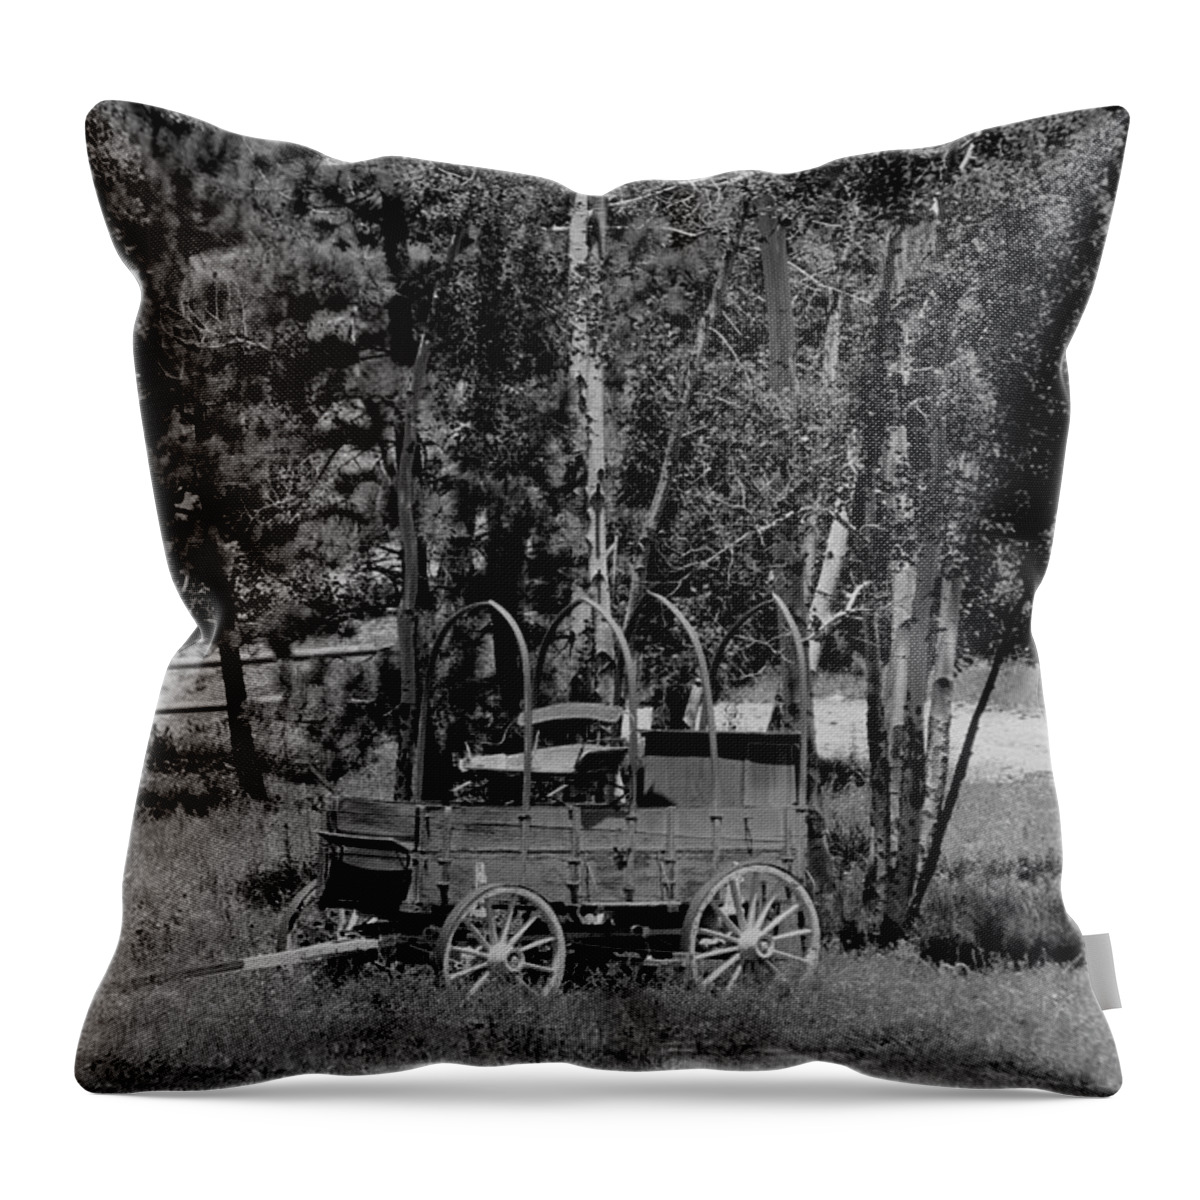 Wagon Throw Pillow featuring the photograph Wagon Trail by Trent Mallett